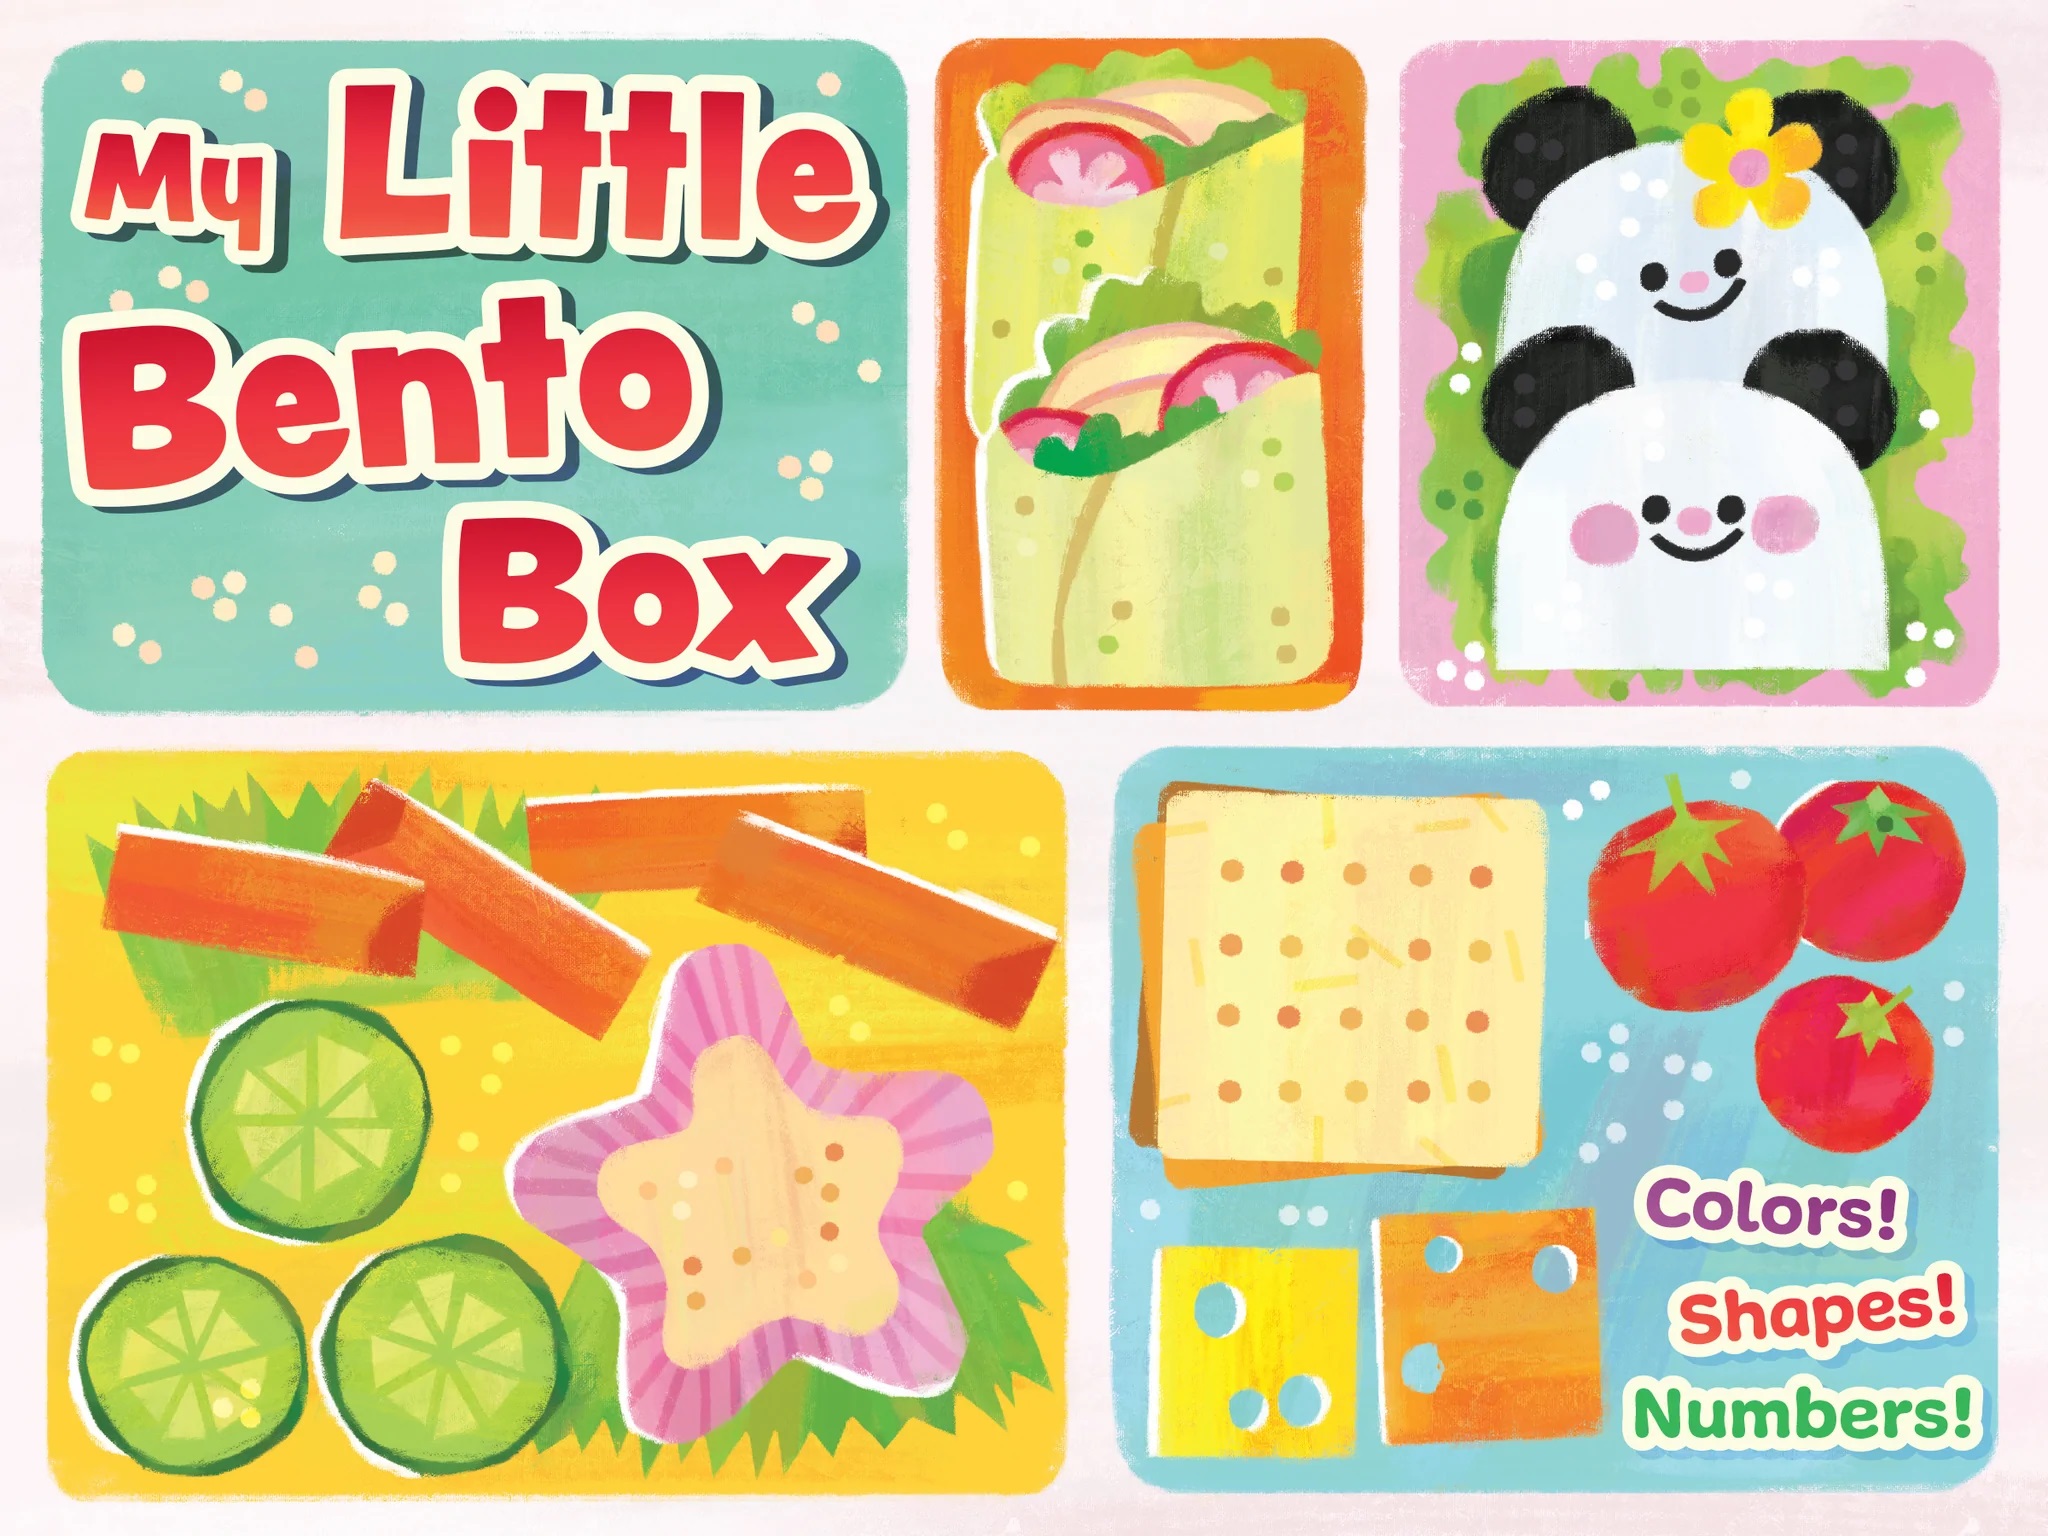 My Little Bento Box: Colors, Shapes, Numbers Board Book
